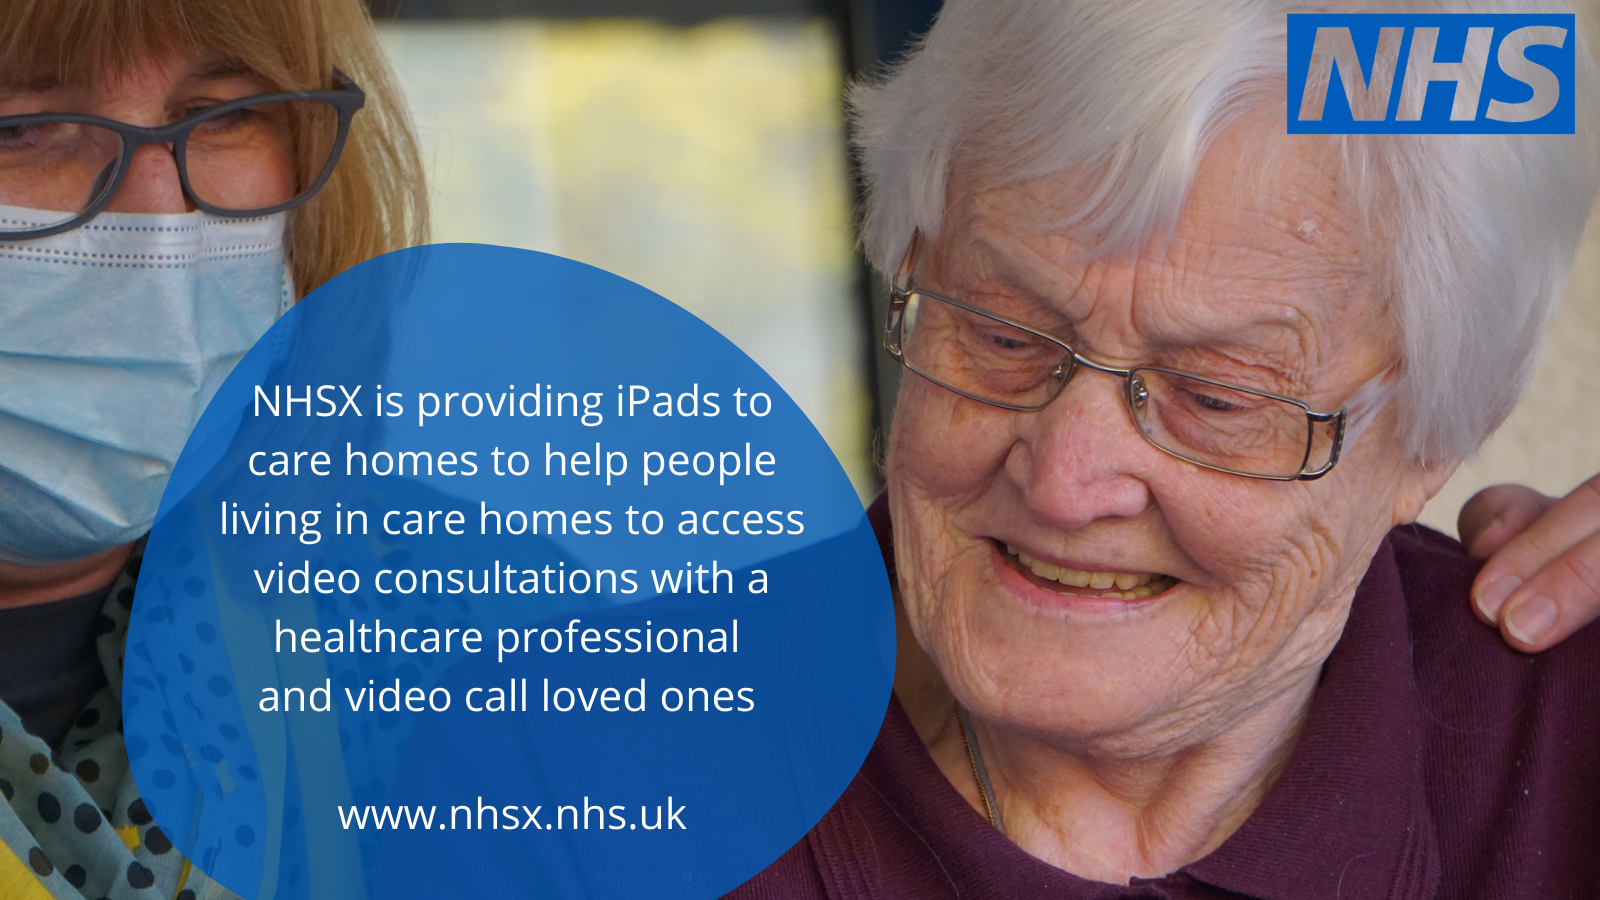 NHSX initiative offers free iPad for care homes